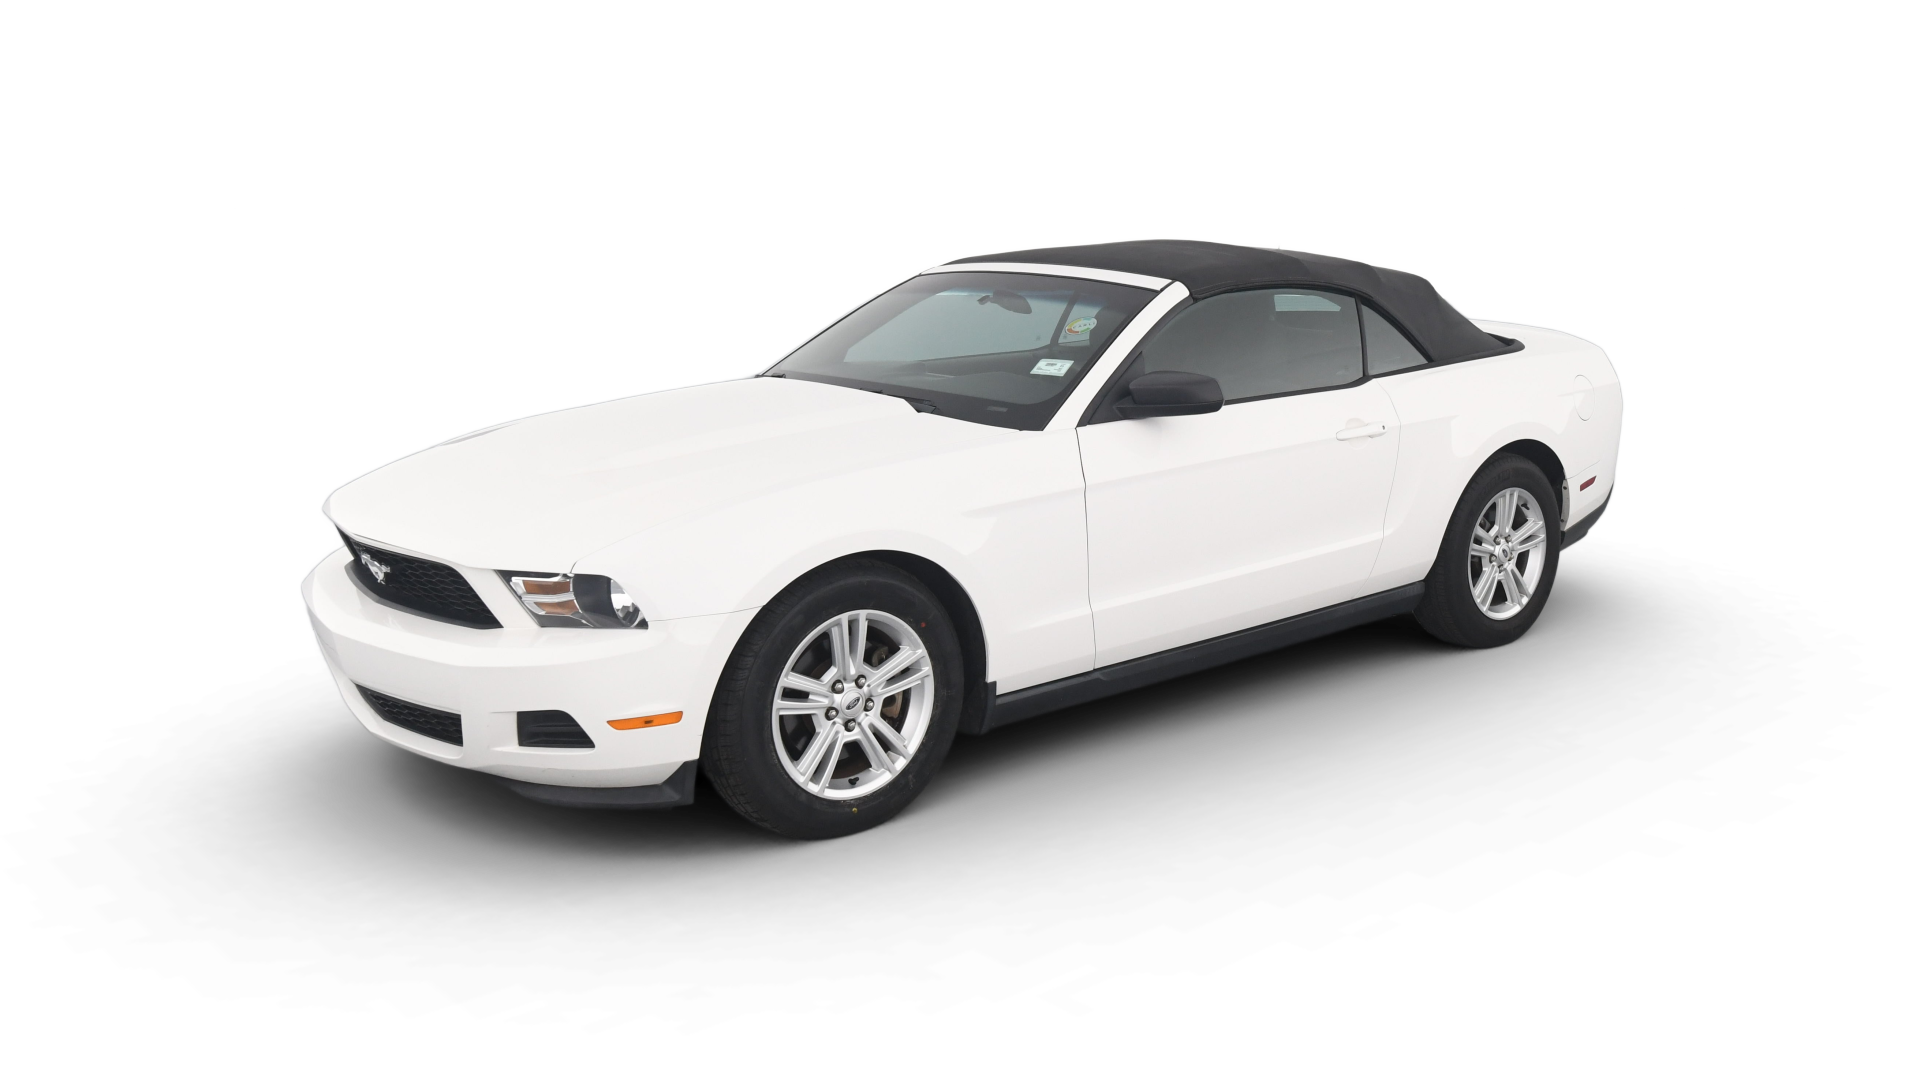 Ford Mustang model image.